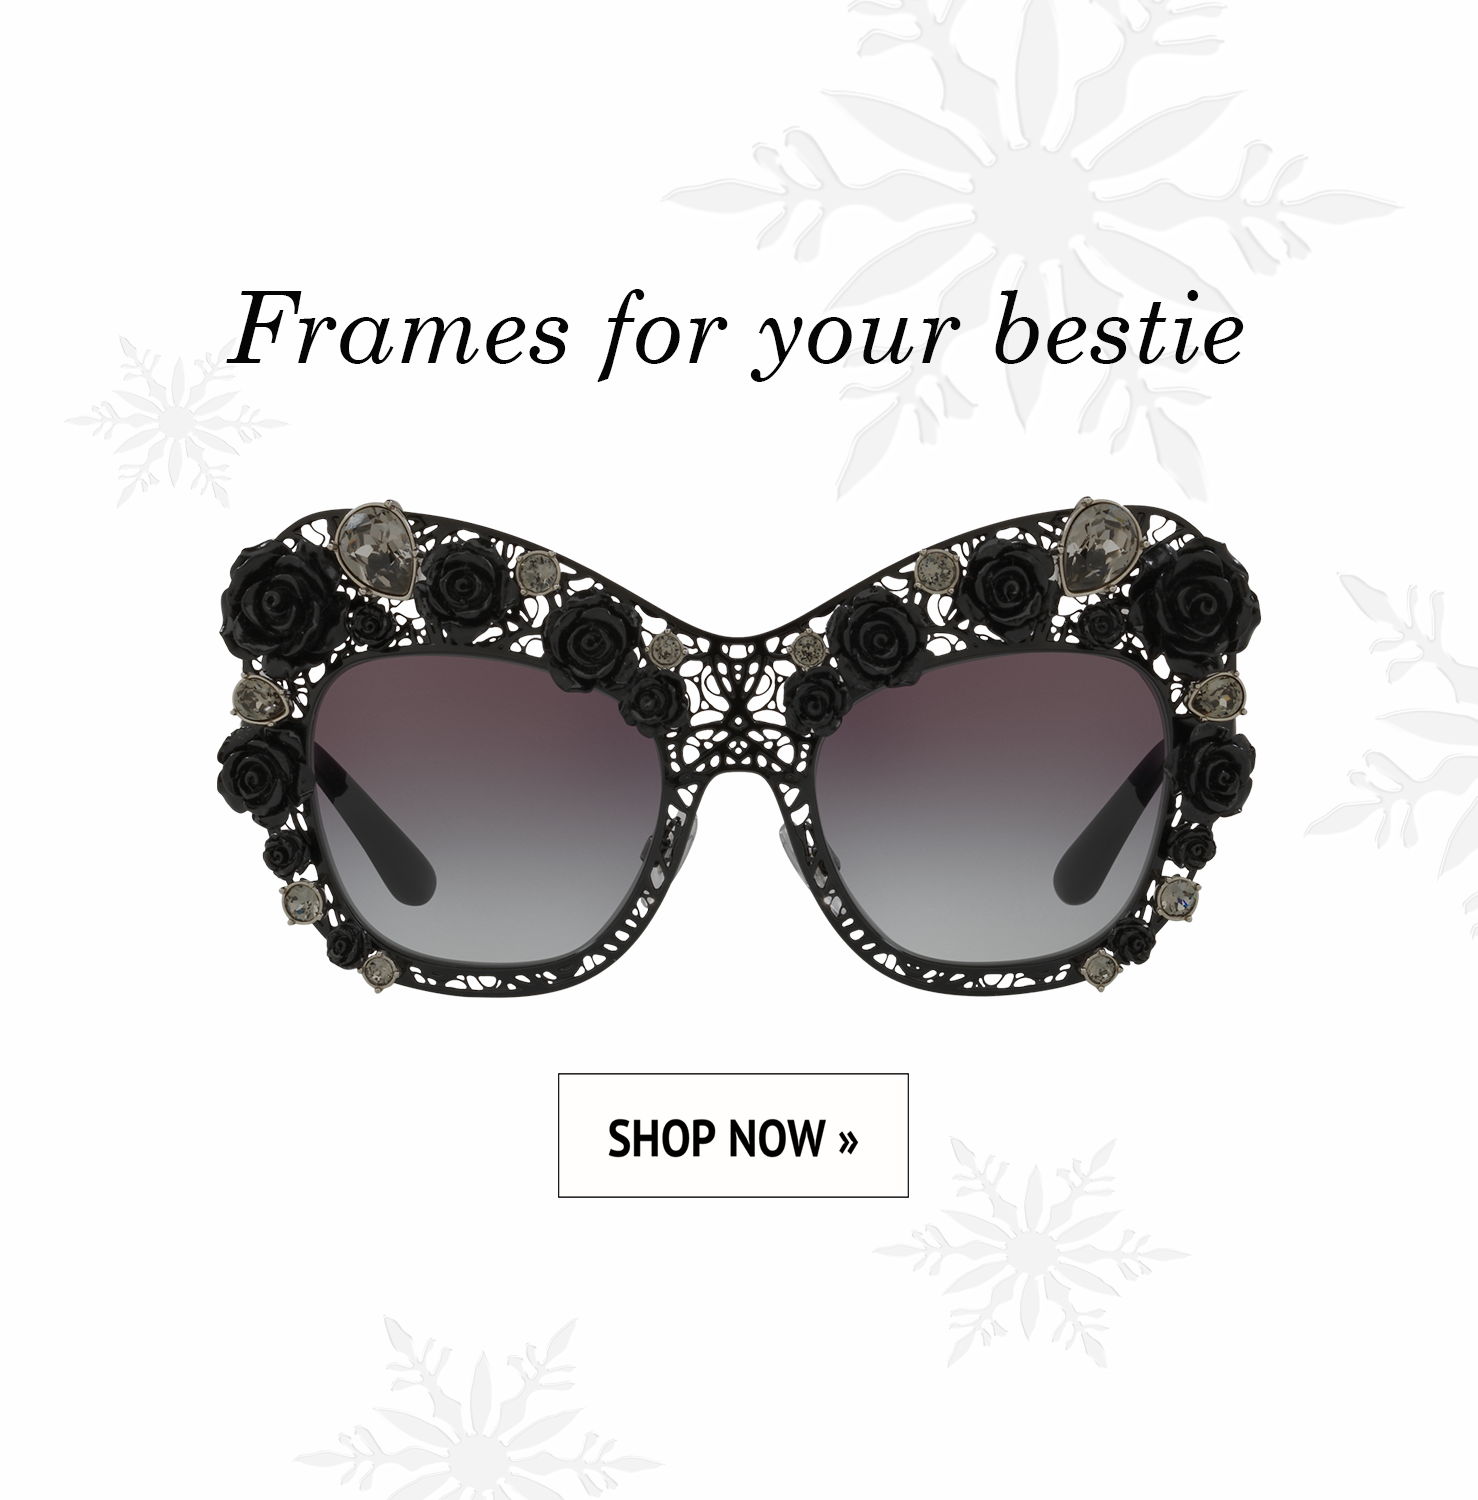 Frames for your bestie